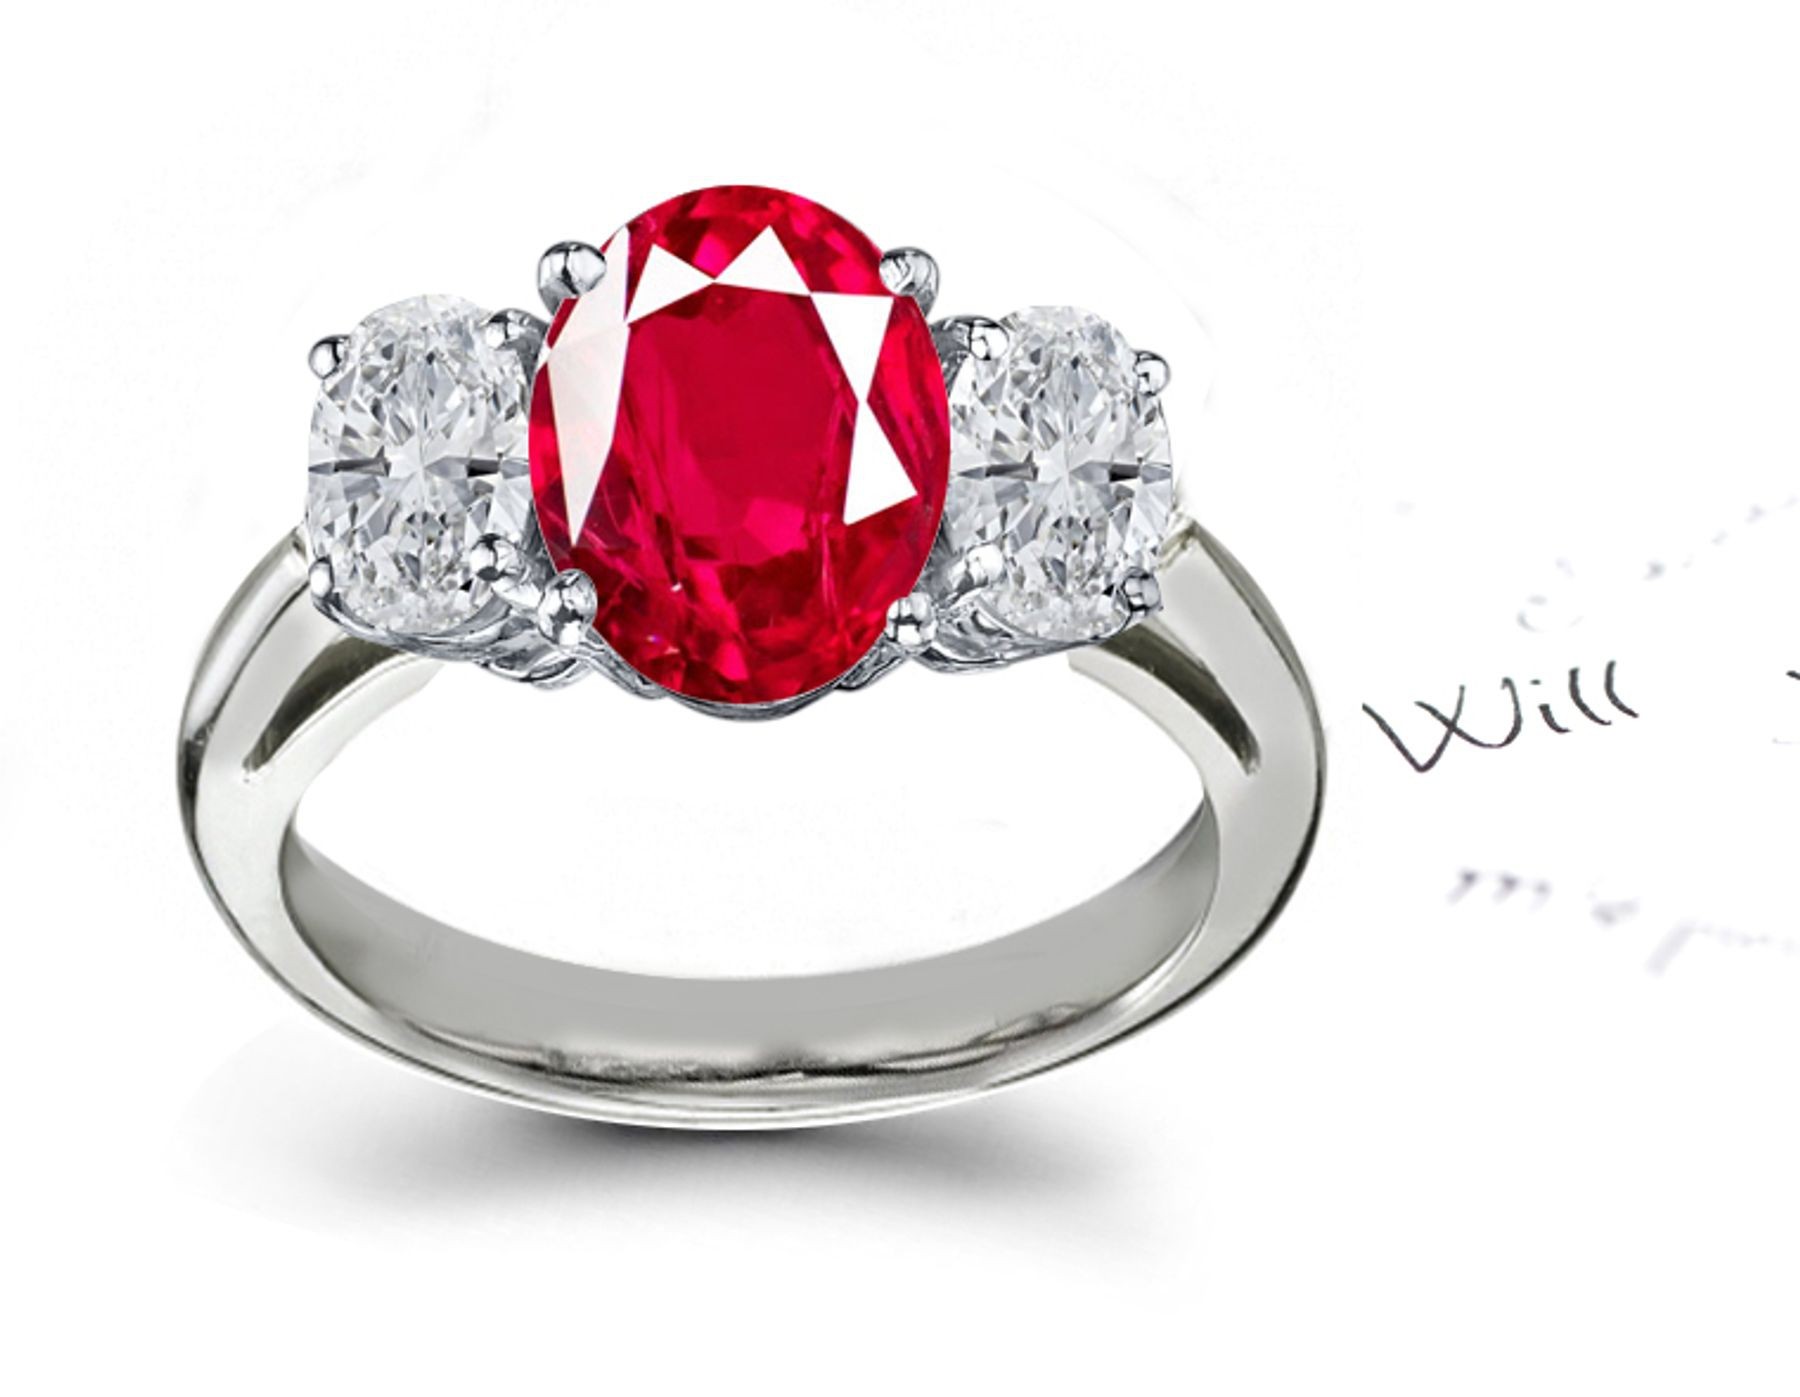 Sparkling Ruby Diamond Three Stone Rings: Ruby is "Gem of Gems" and birthstone of July.